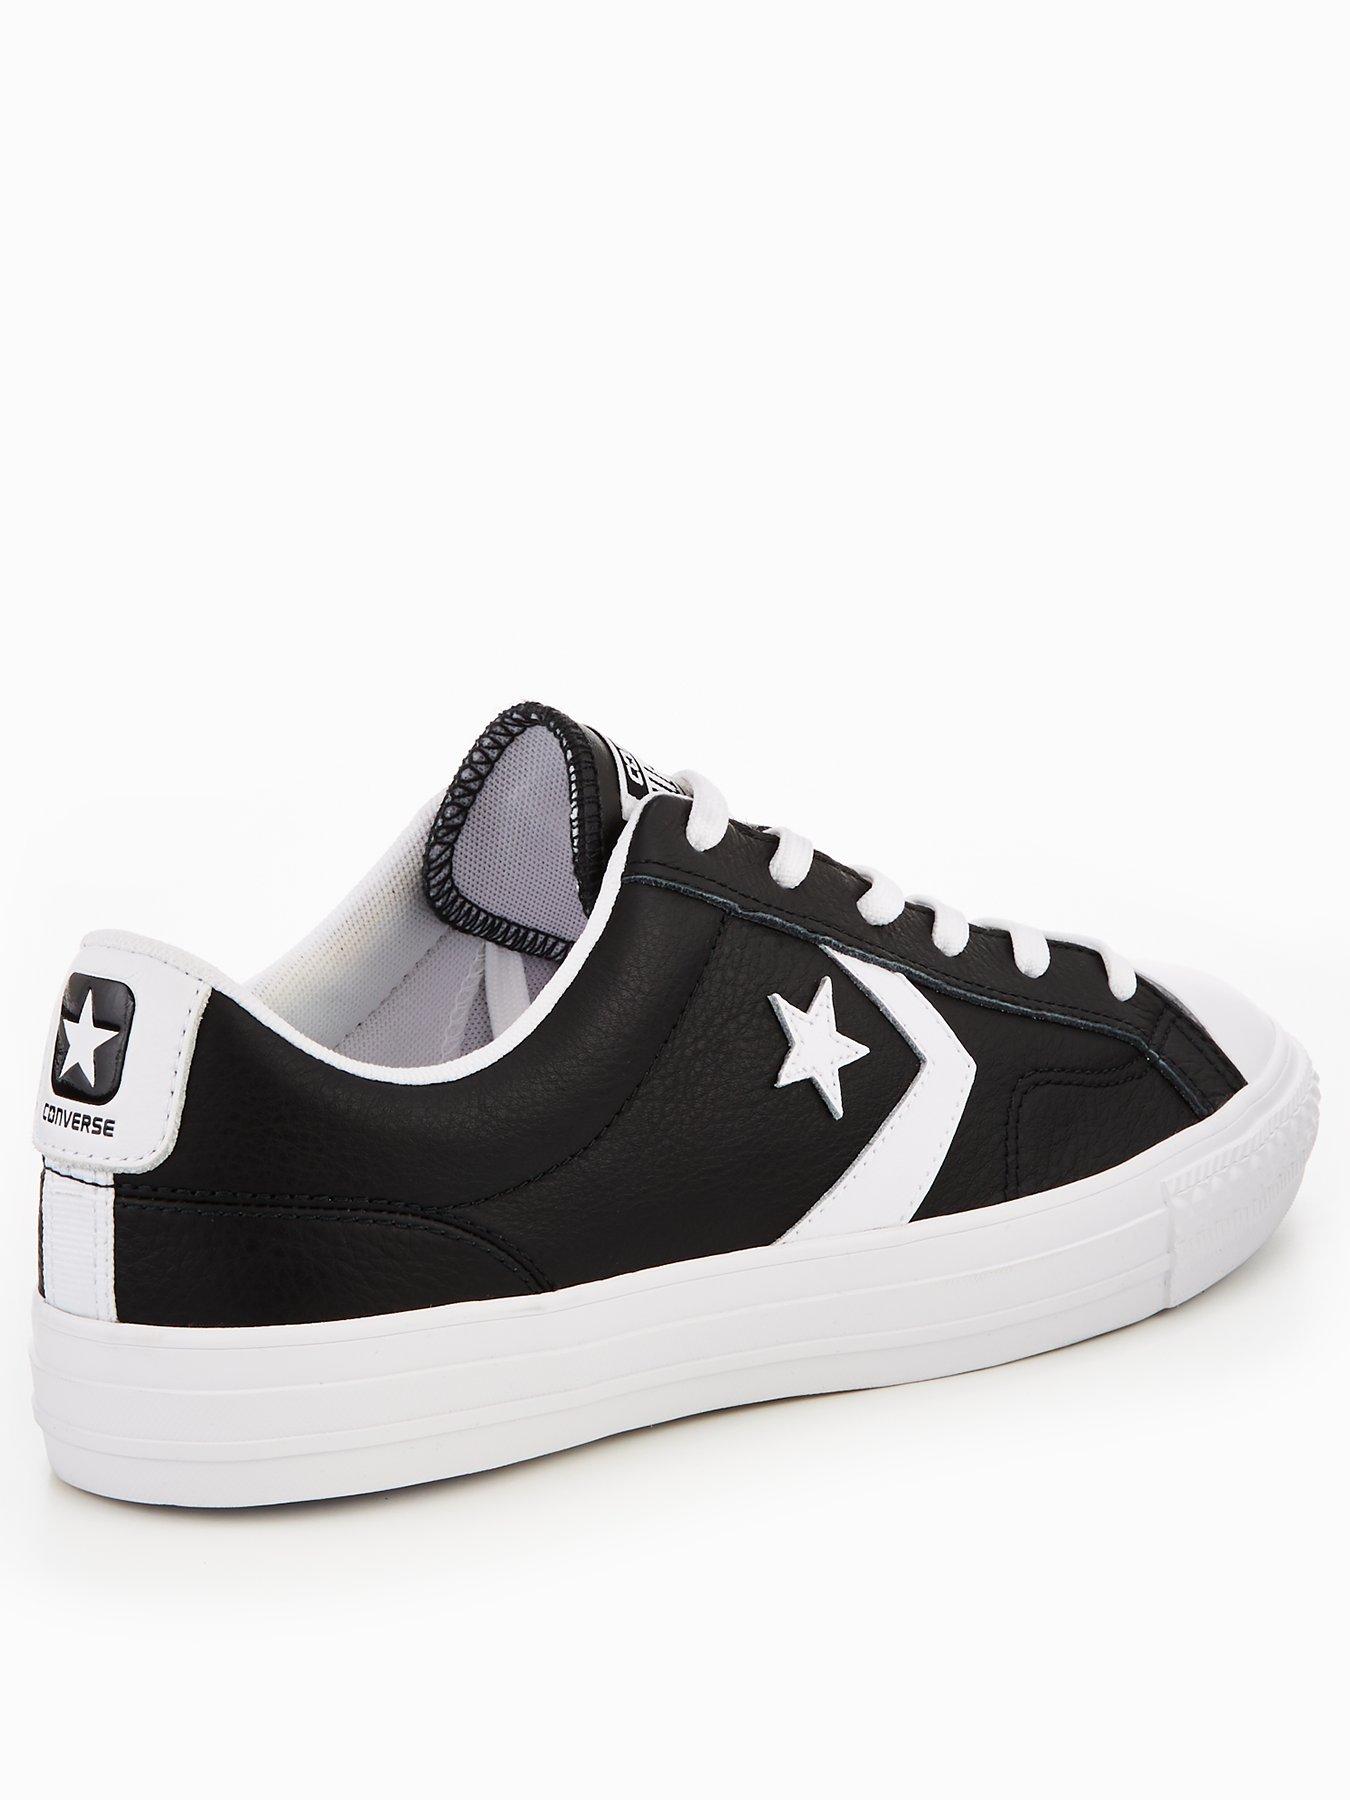 converse star player leather essentials ox